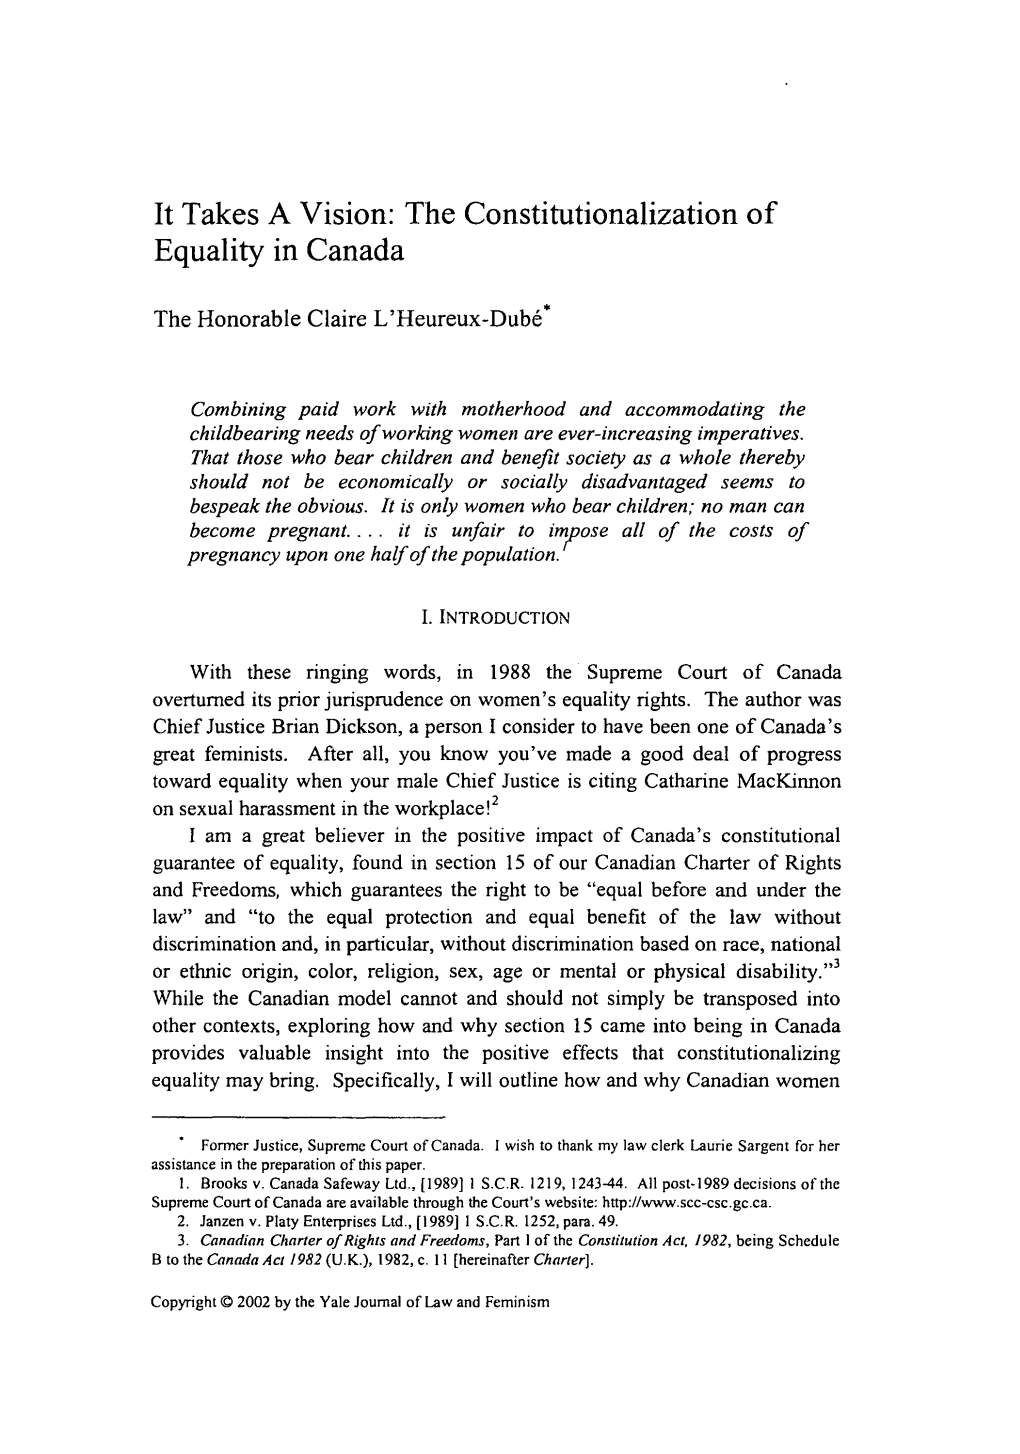 The Constitutionalization of Equality in Canada